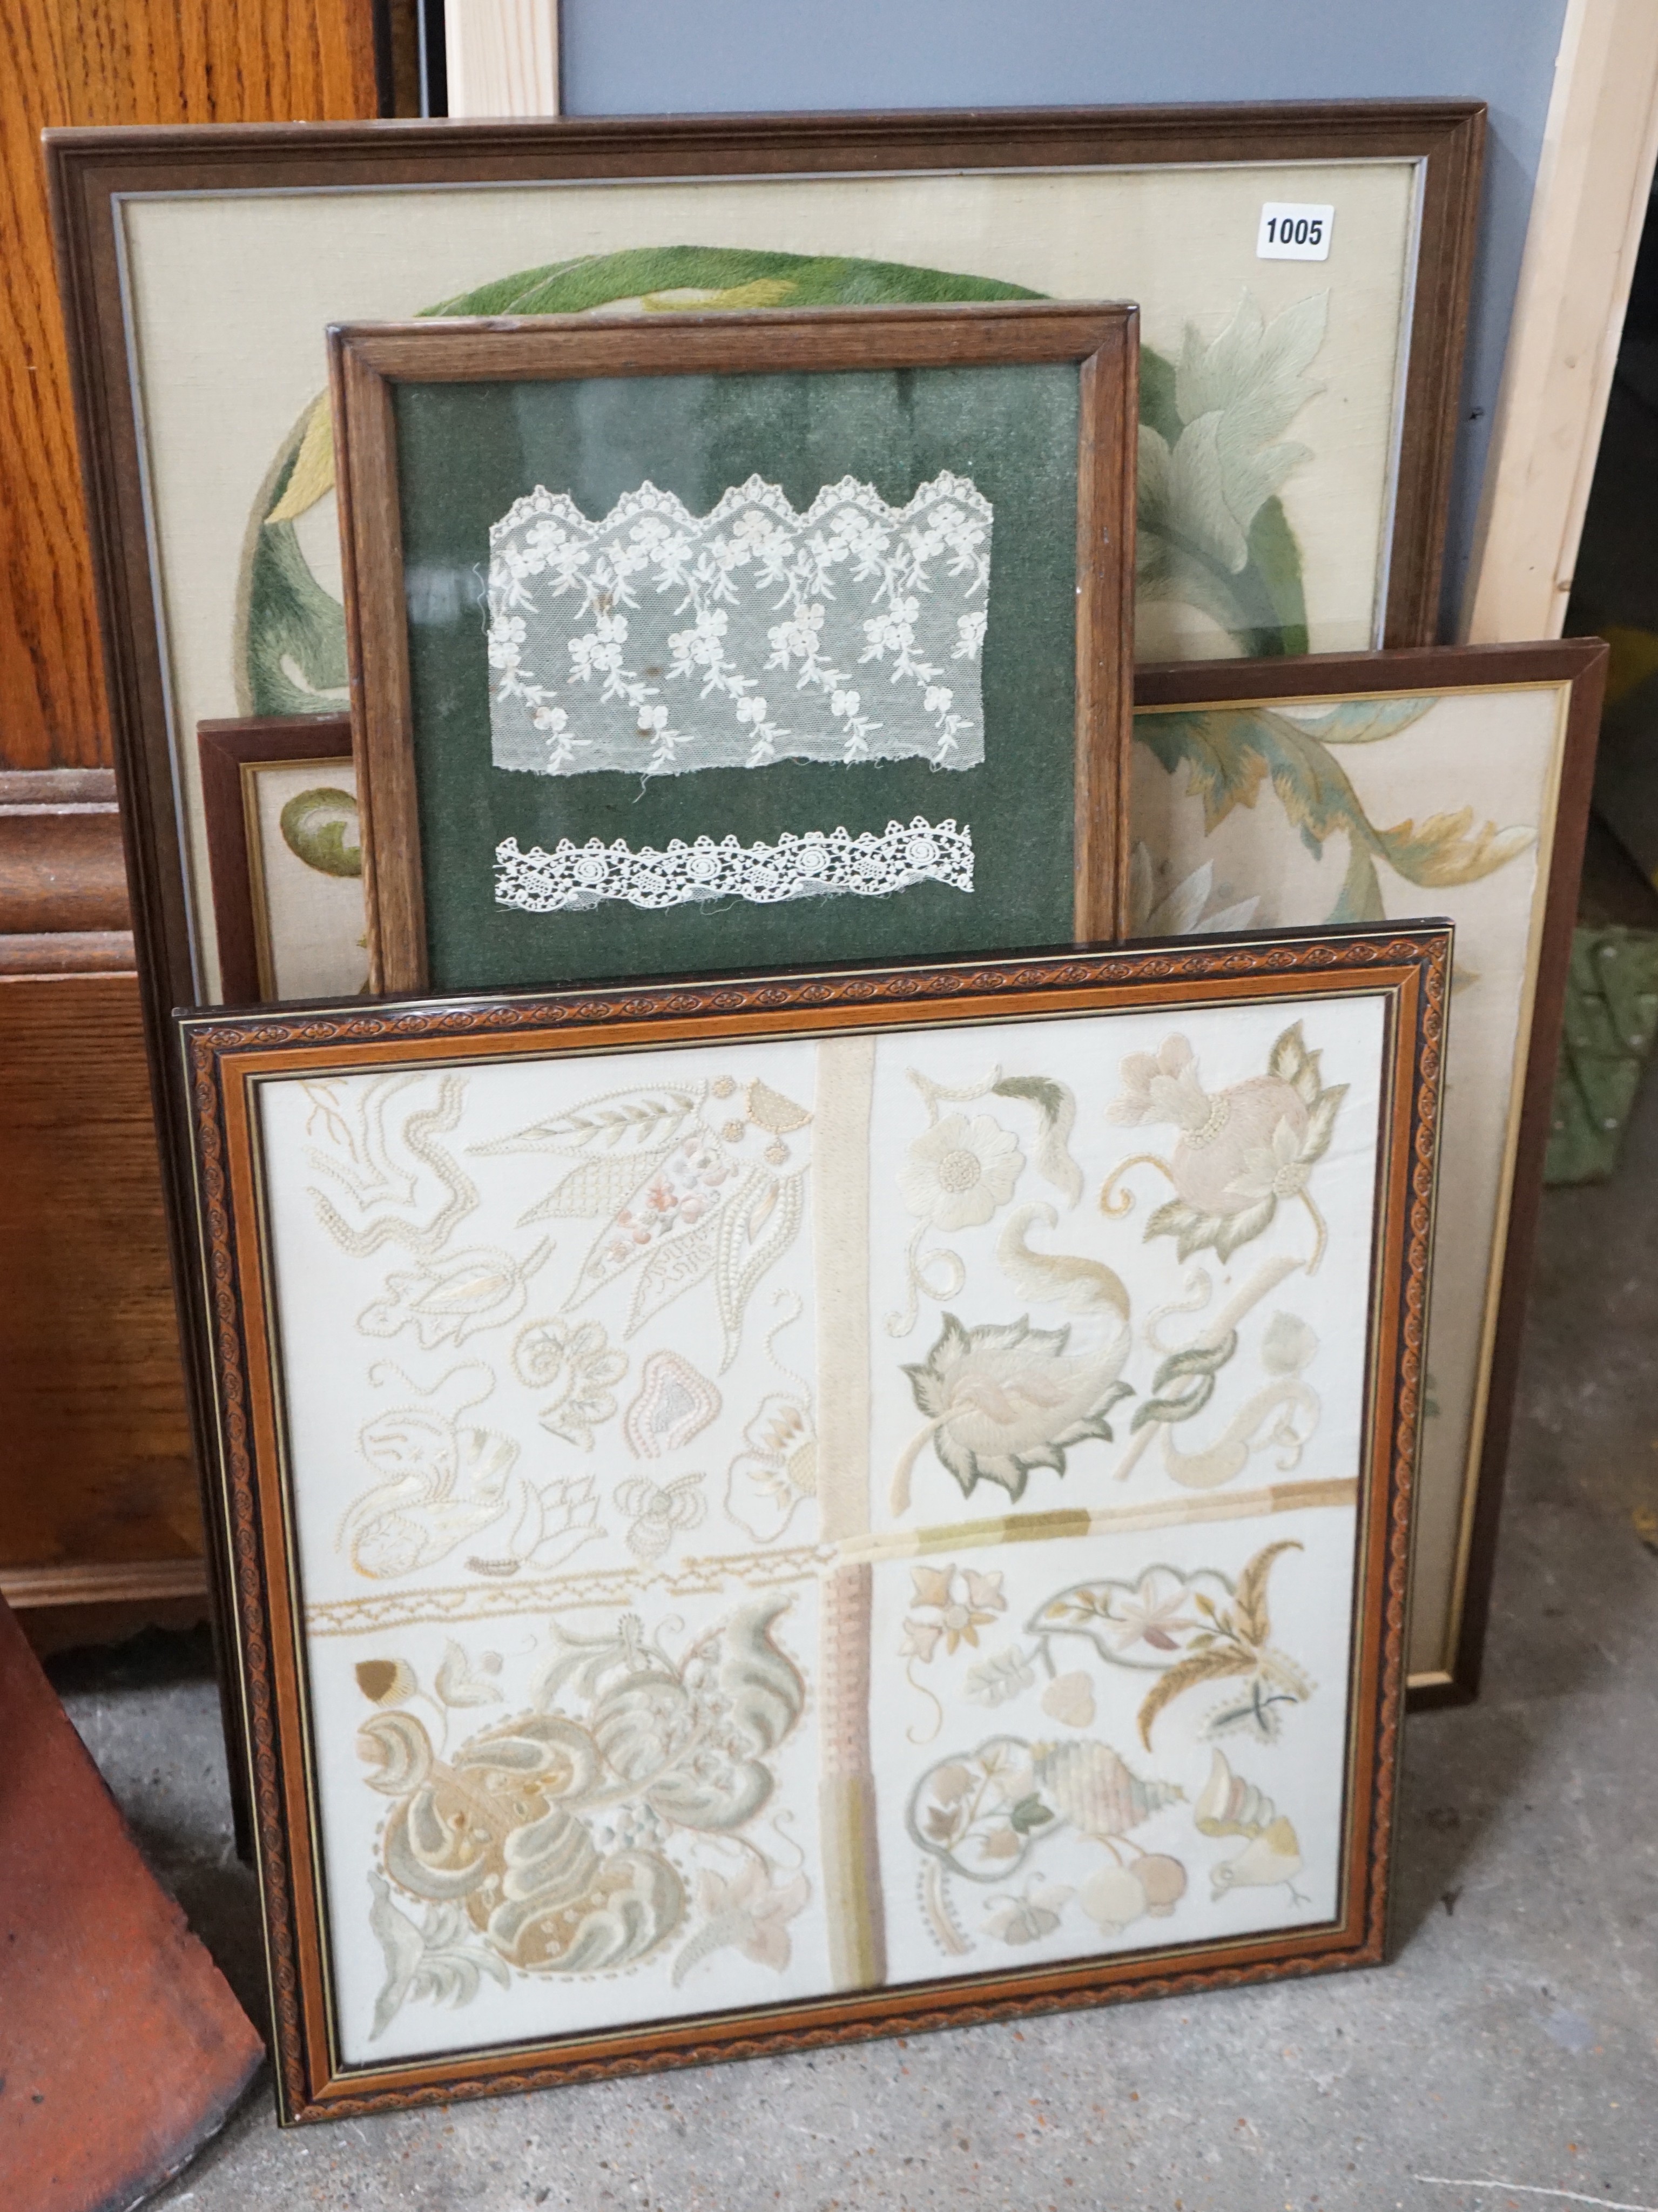 Eight framed embroideries / lace panels including a sampler